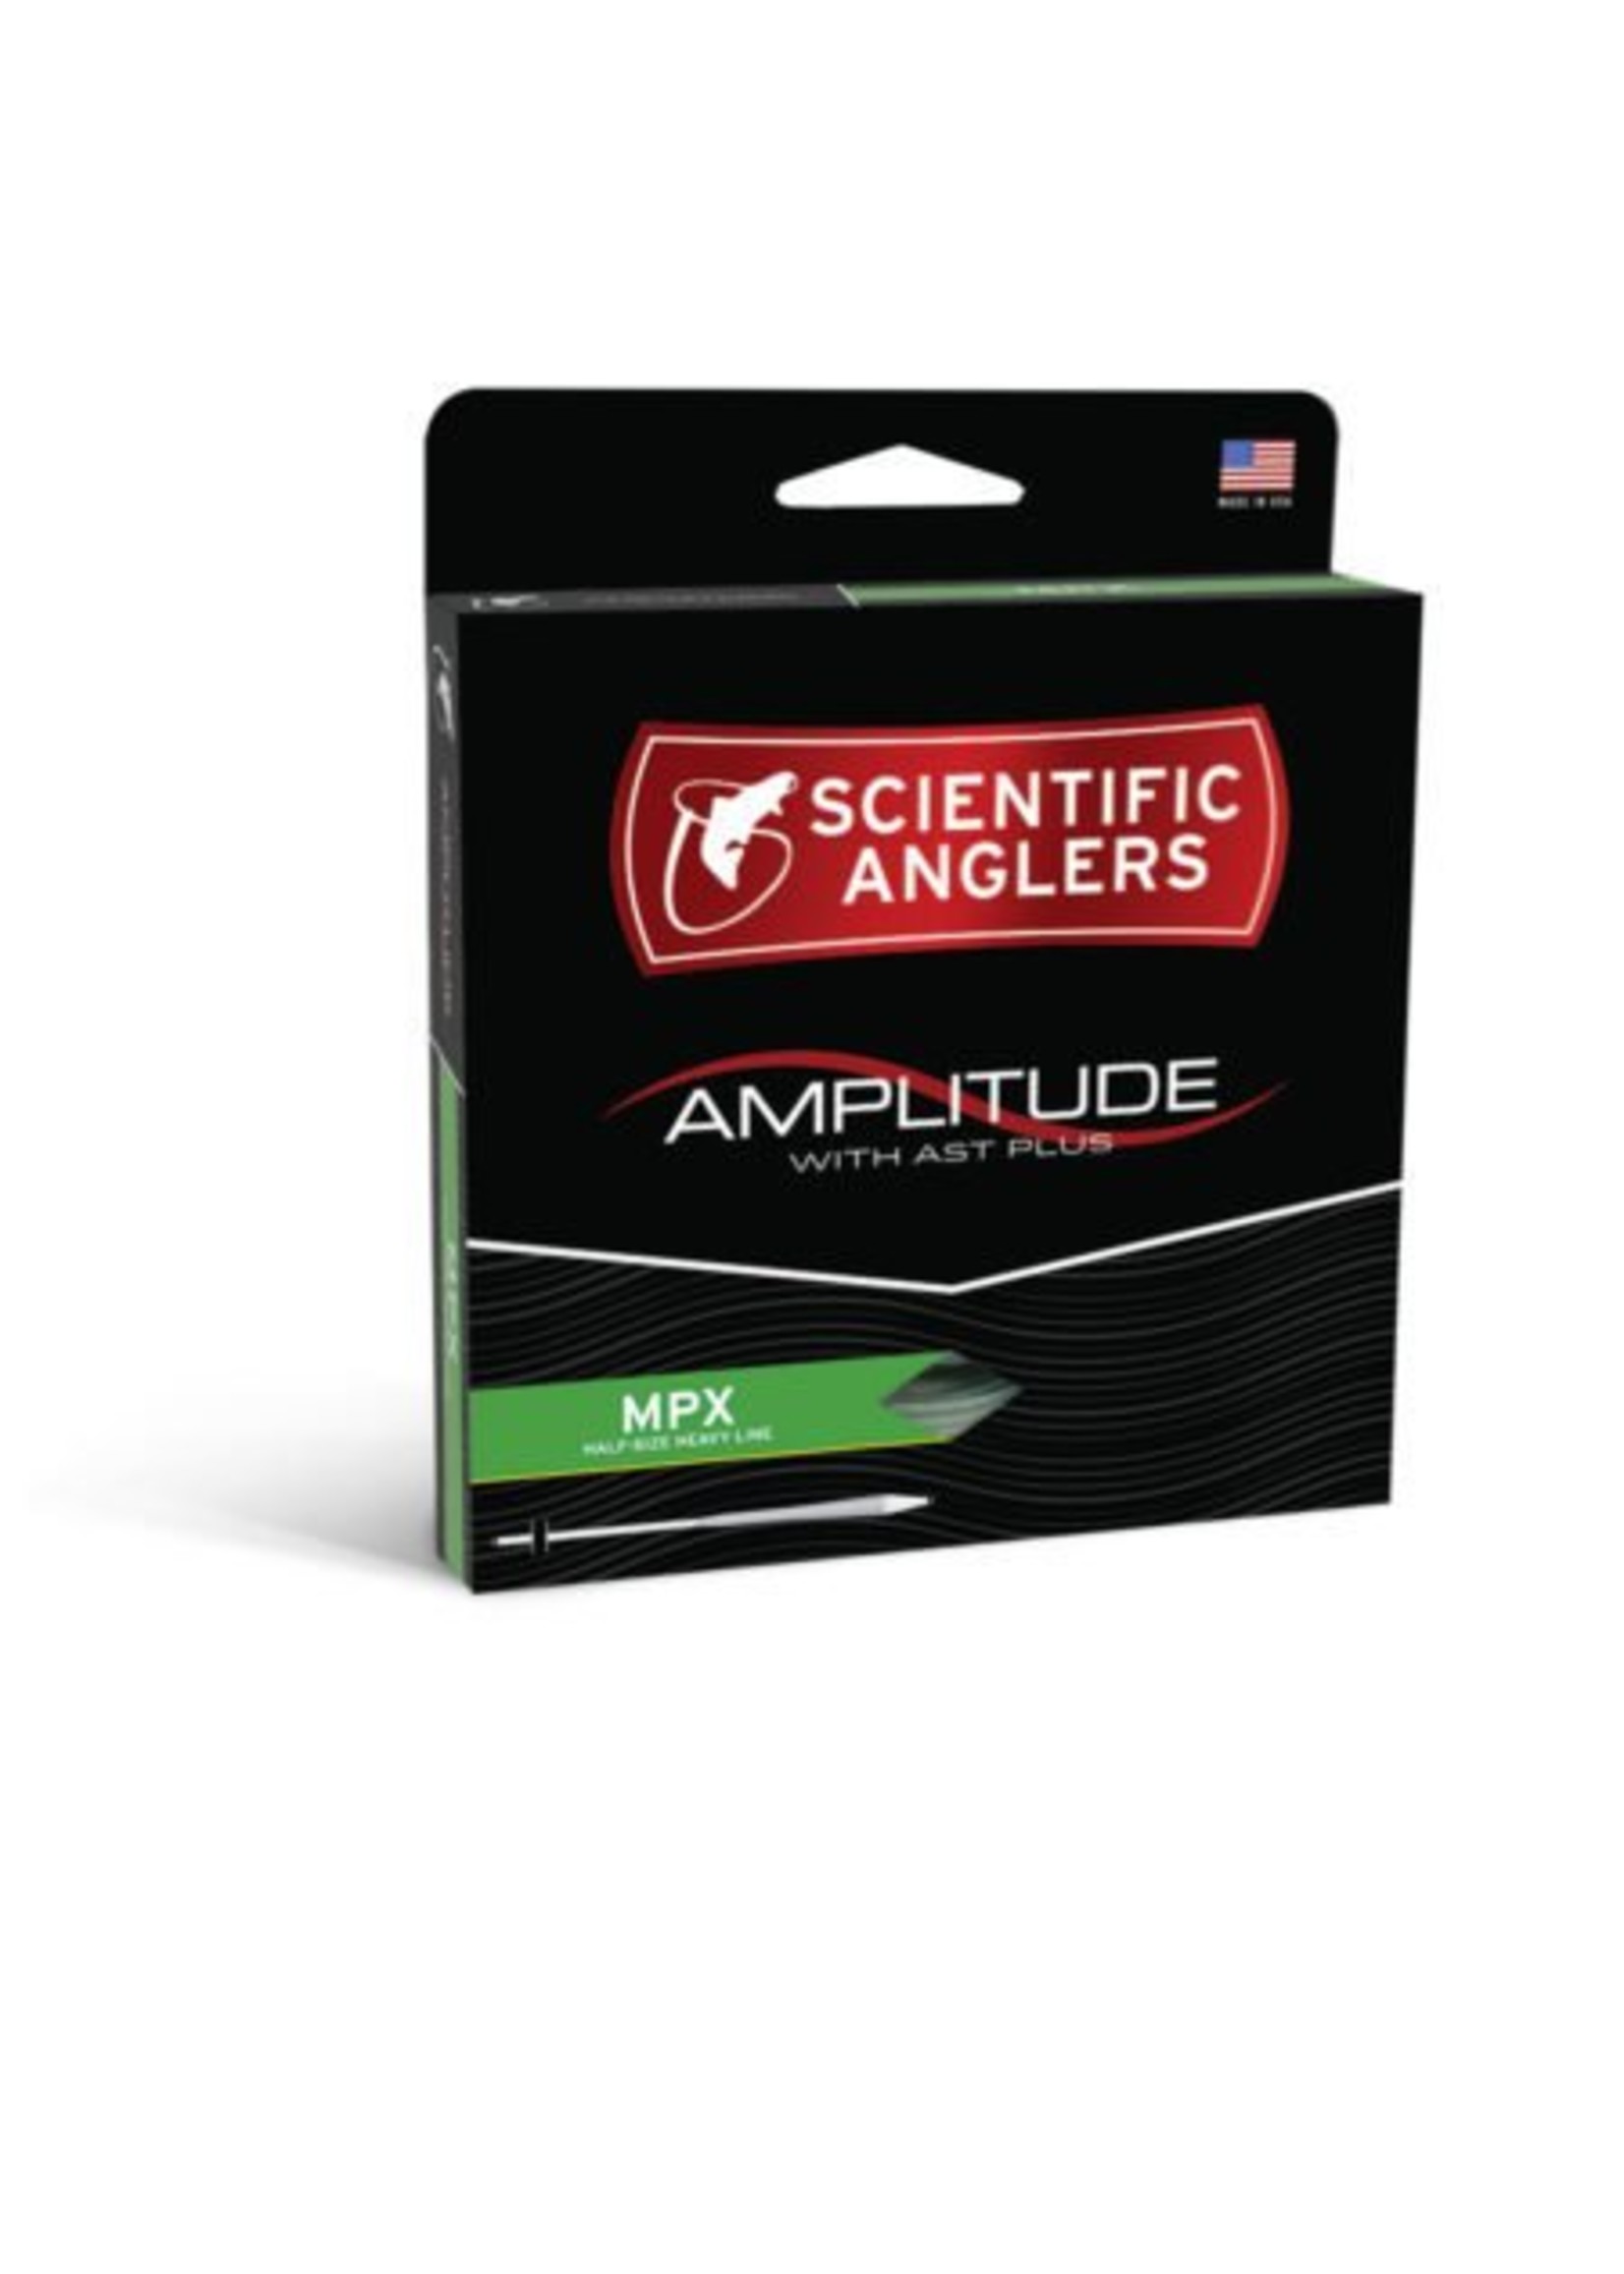 Scientific Anglers Scientific Anglers Amplitude Textured MPX Fly Line